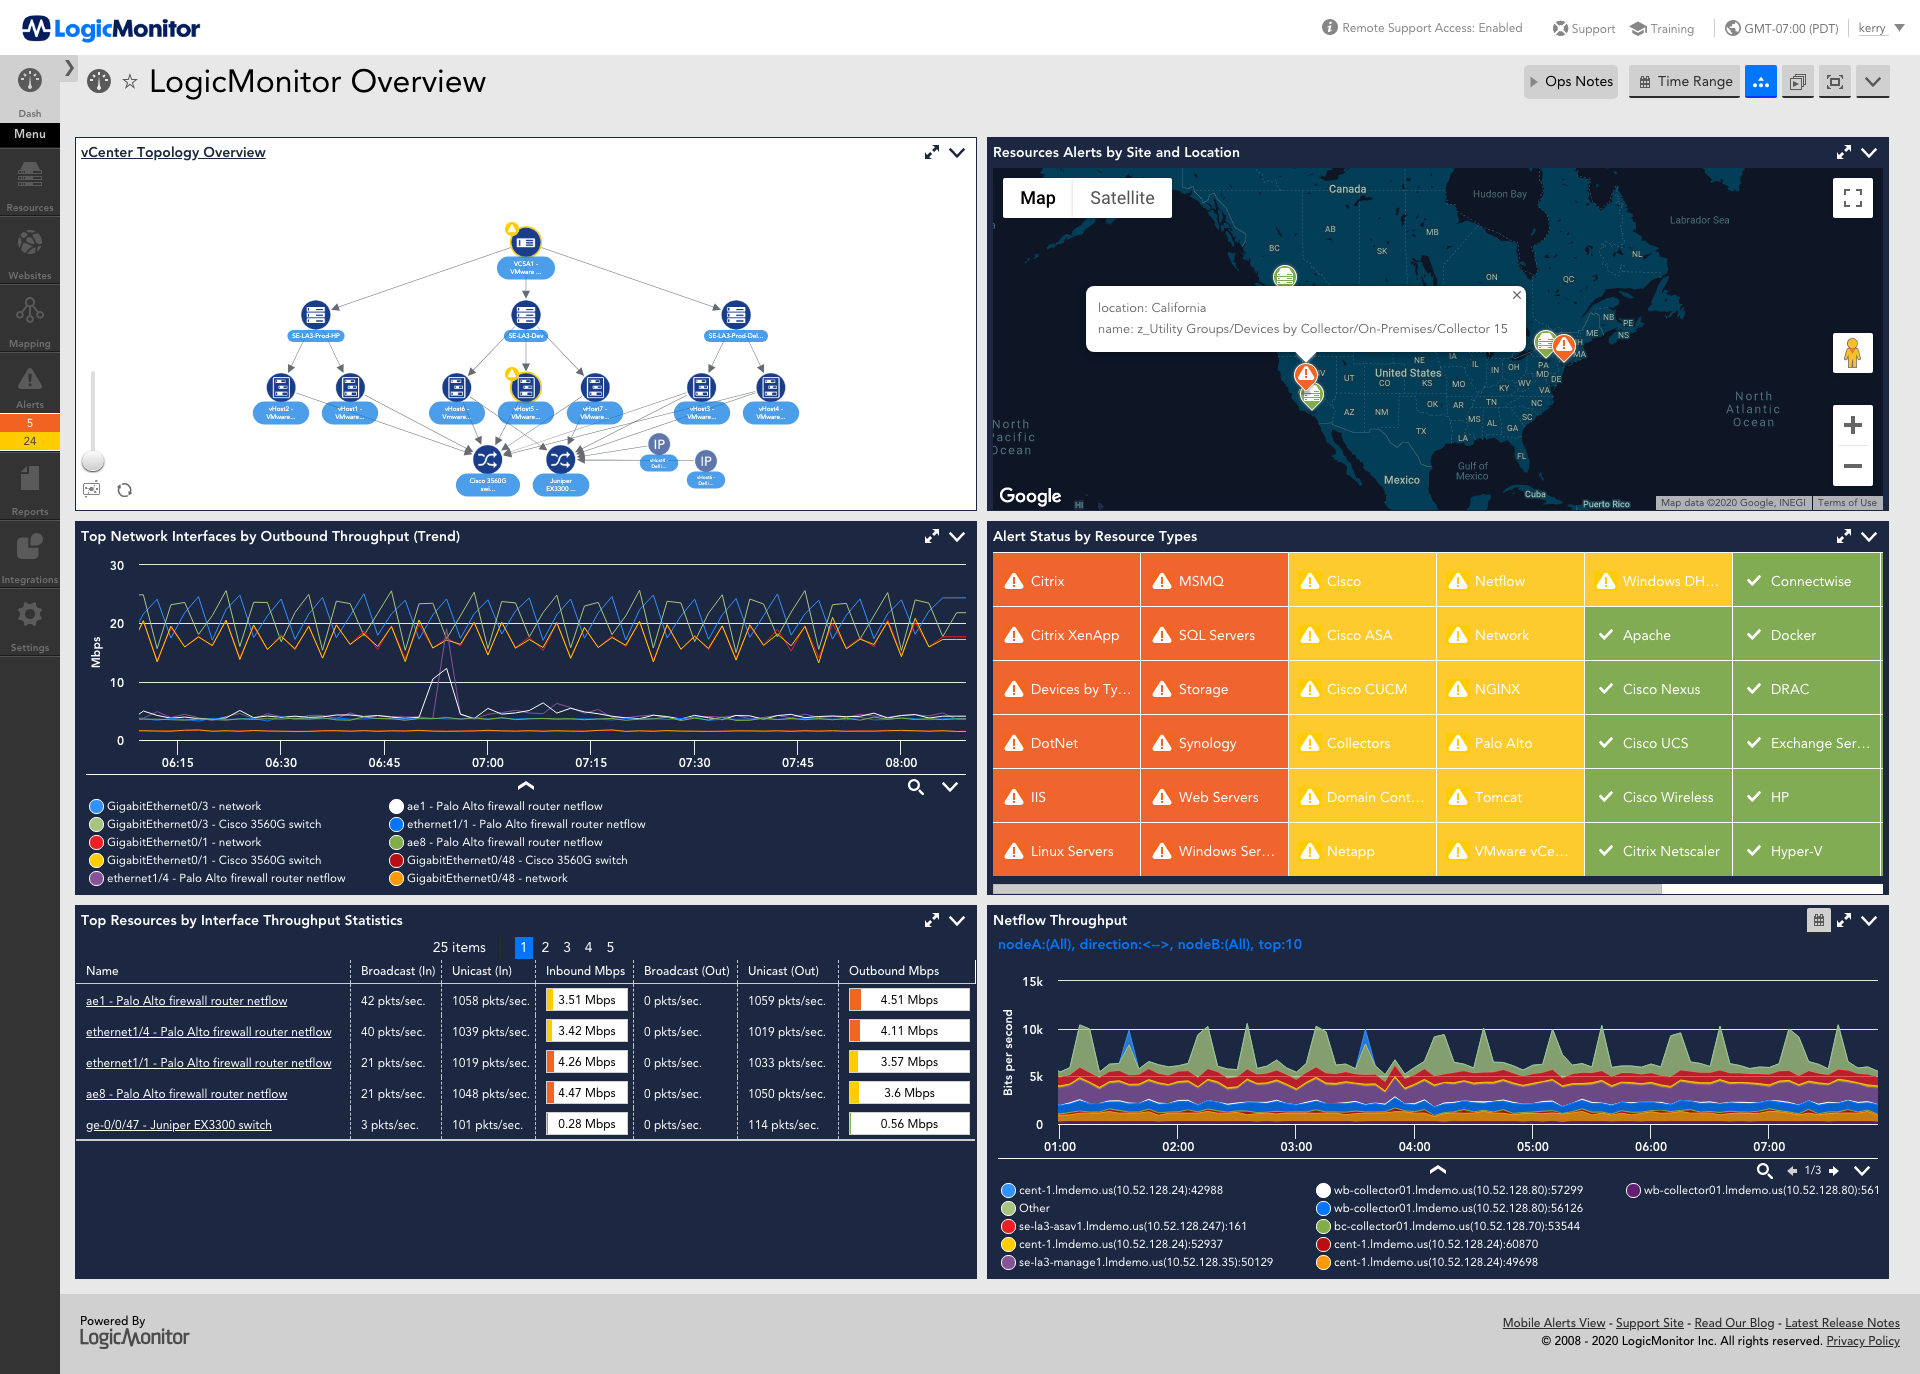 LogicMonitor Dashboard Overview (Source: LogicMonitor website)